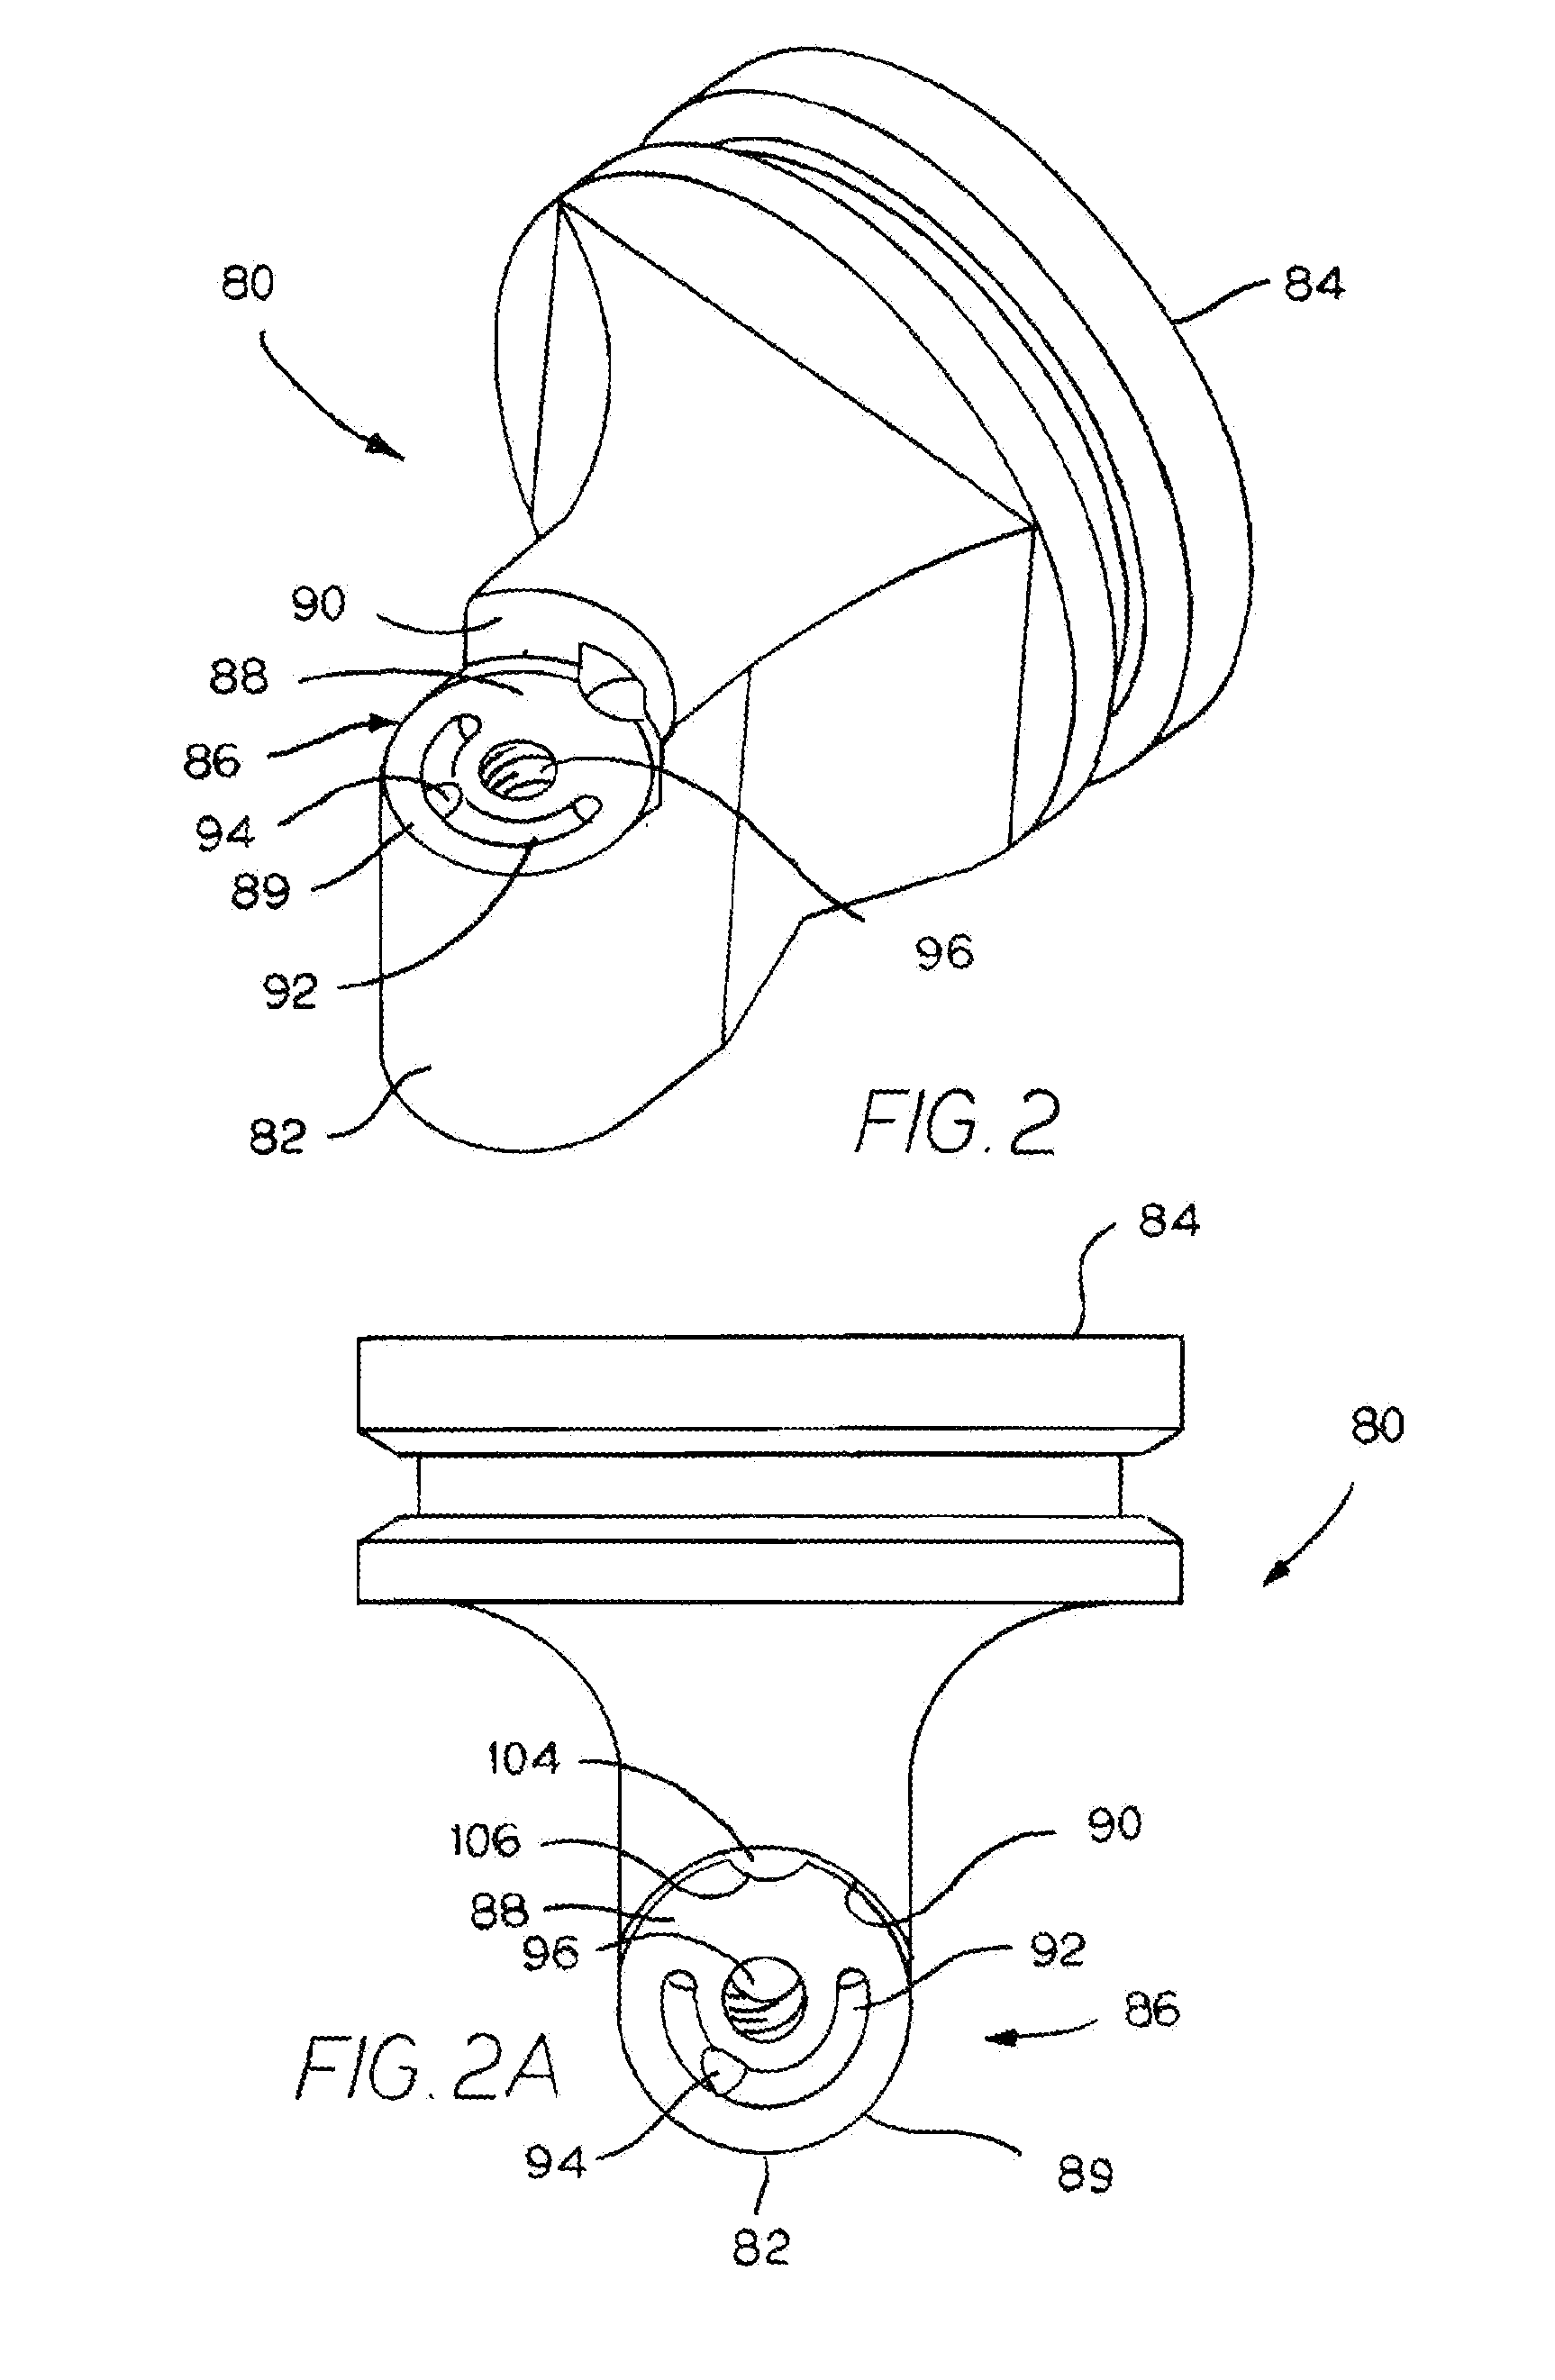 Cutting insert with internal coolant delivery and surface feature for enhanced coolant flow